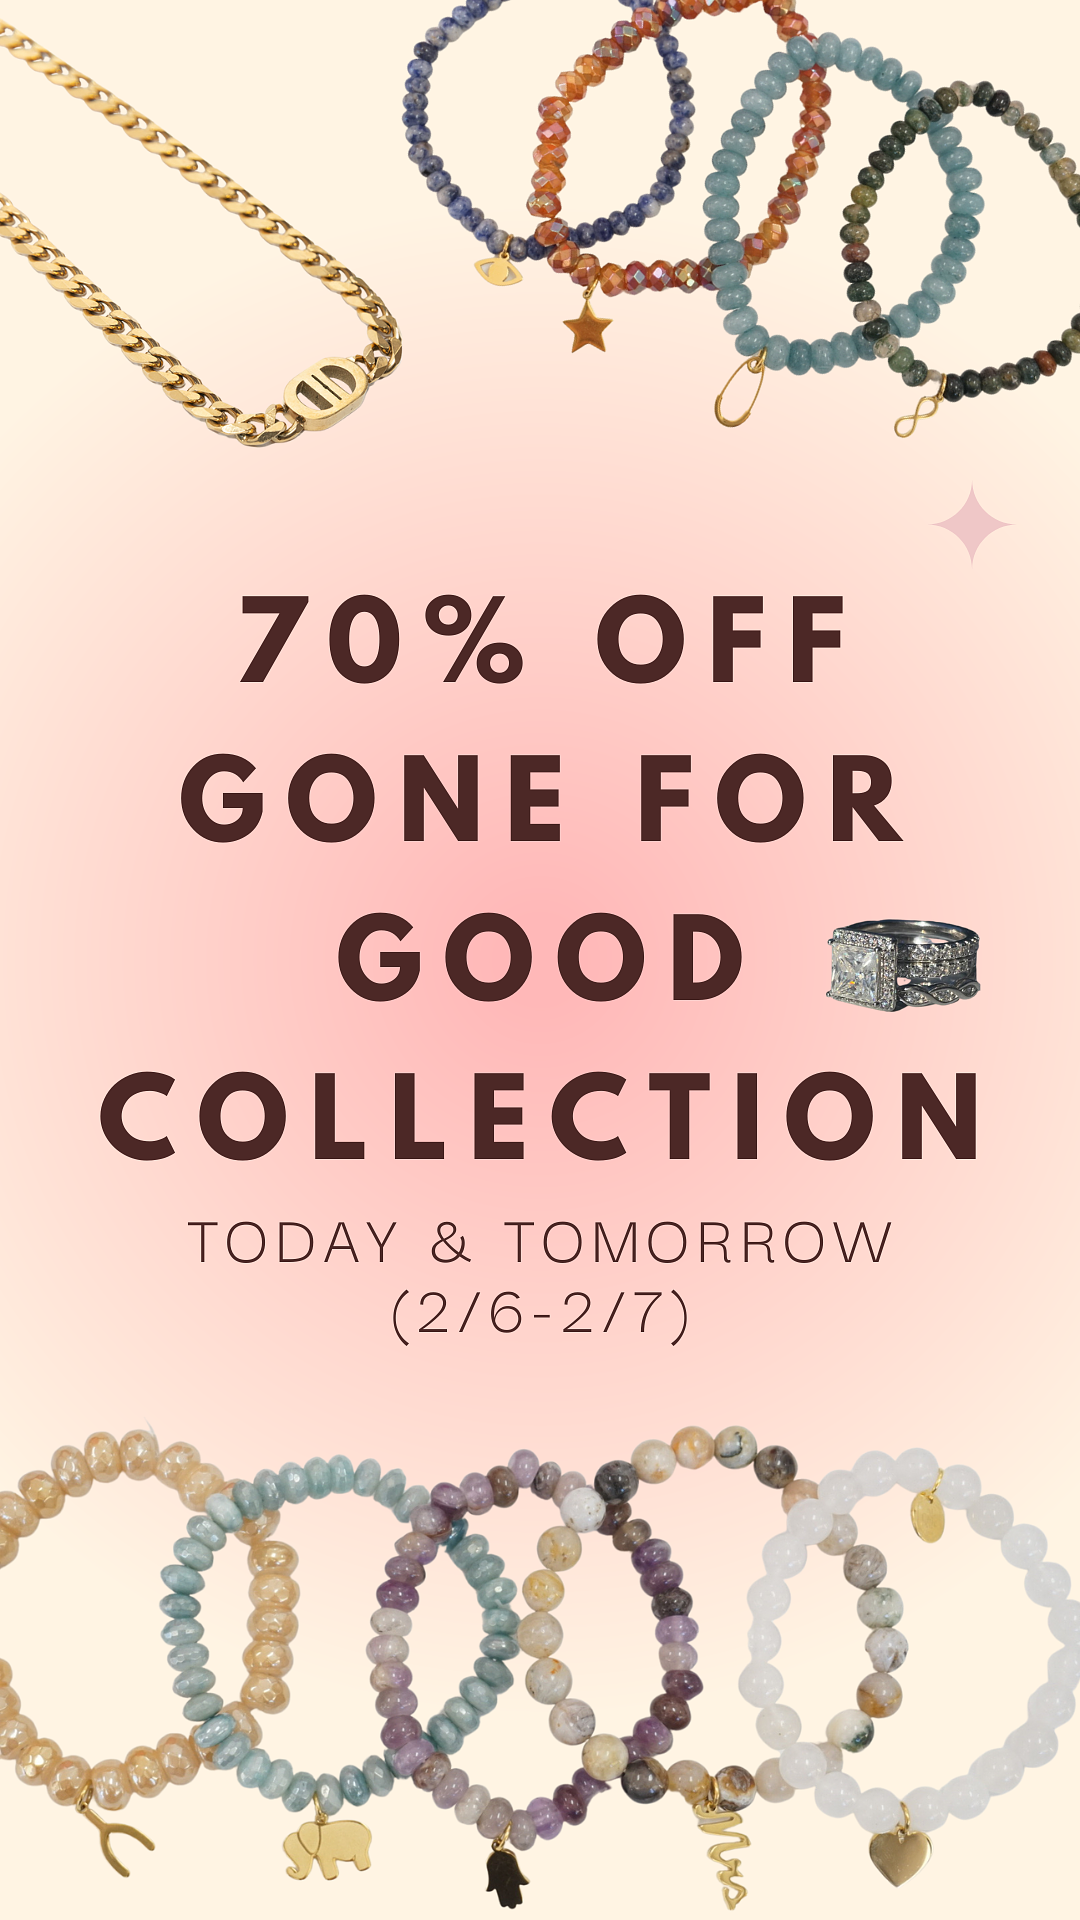  70% OFF GONE FOR COLLECTION TODAY TOMORROW 26-27 . 7 Nl - - 7 4'. k N e N g e 1 e D ?'" - : ; ; D g LW y W LR - d 